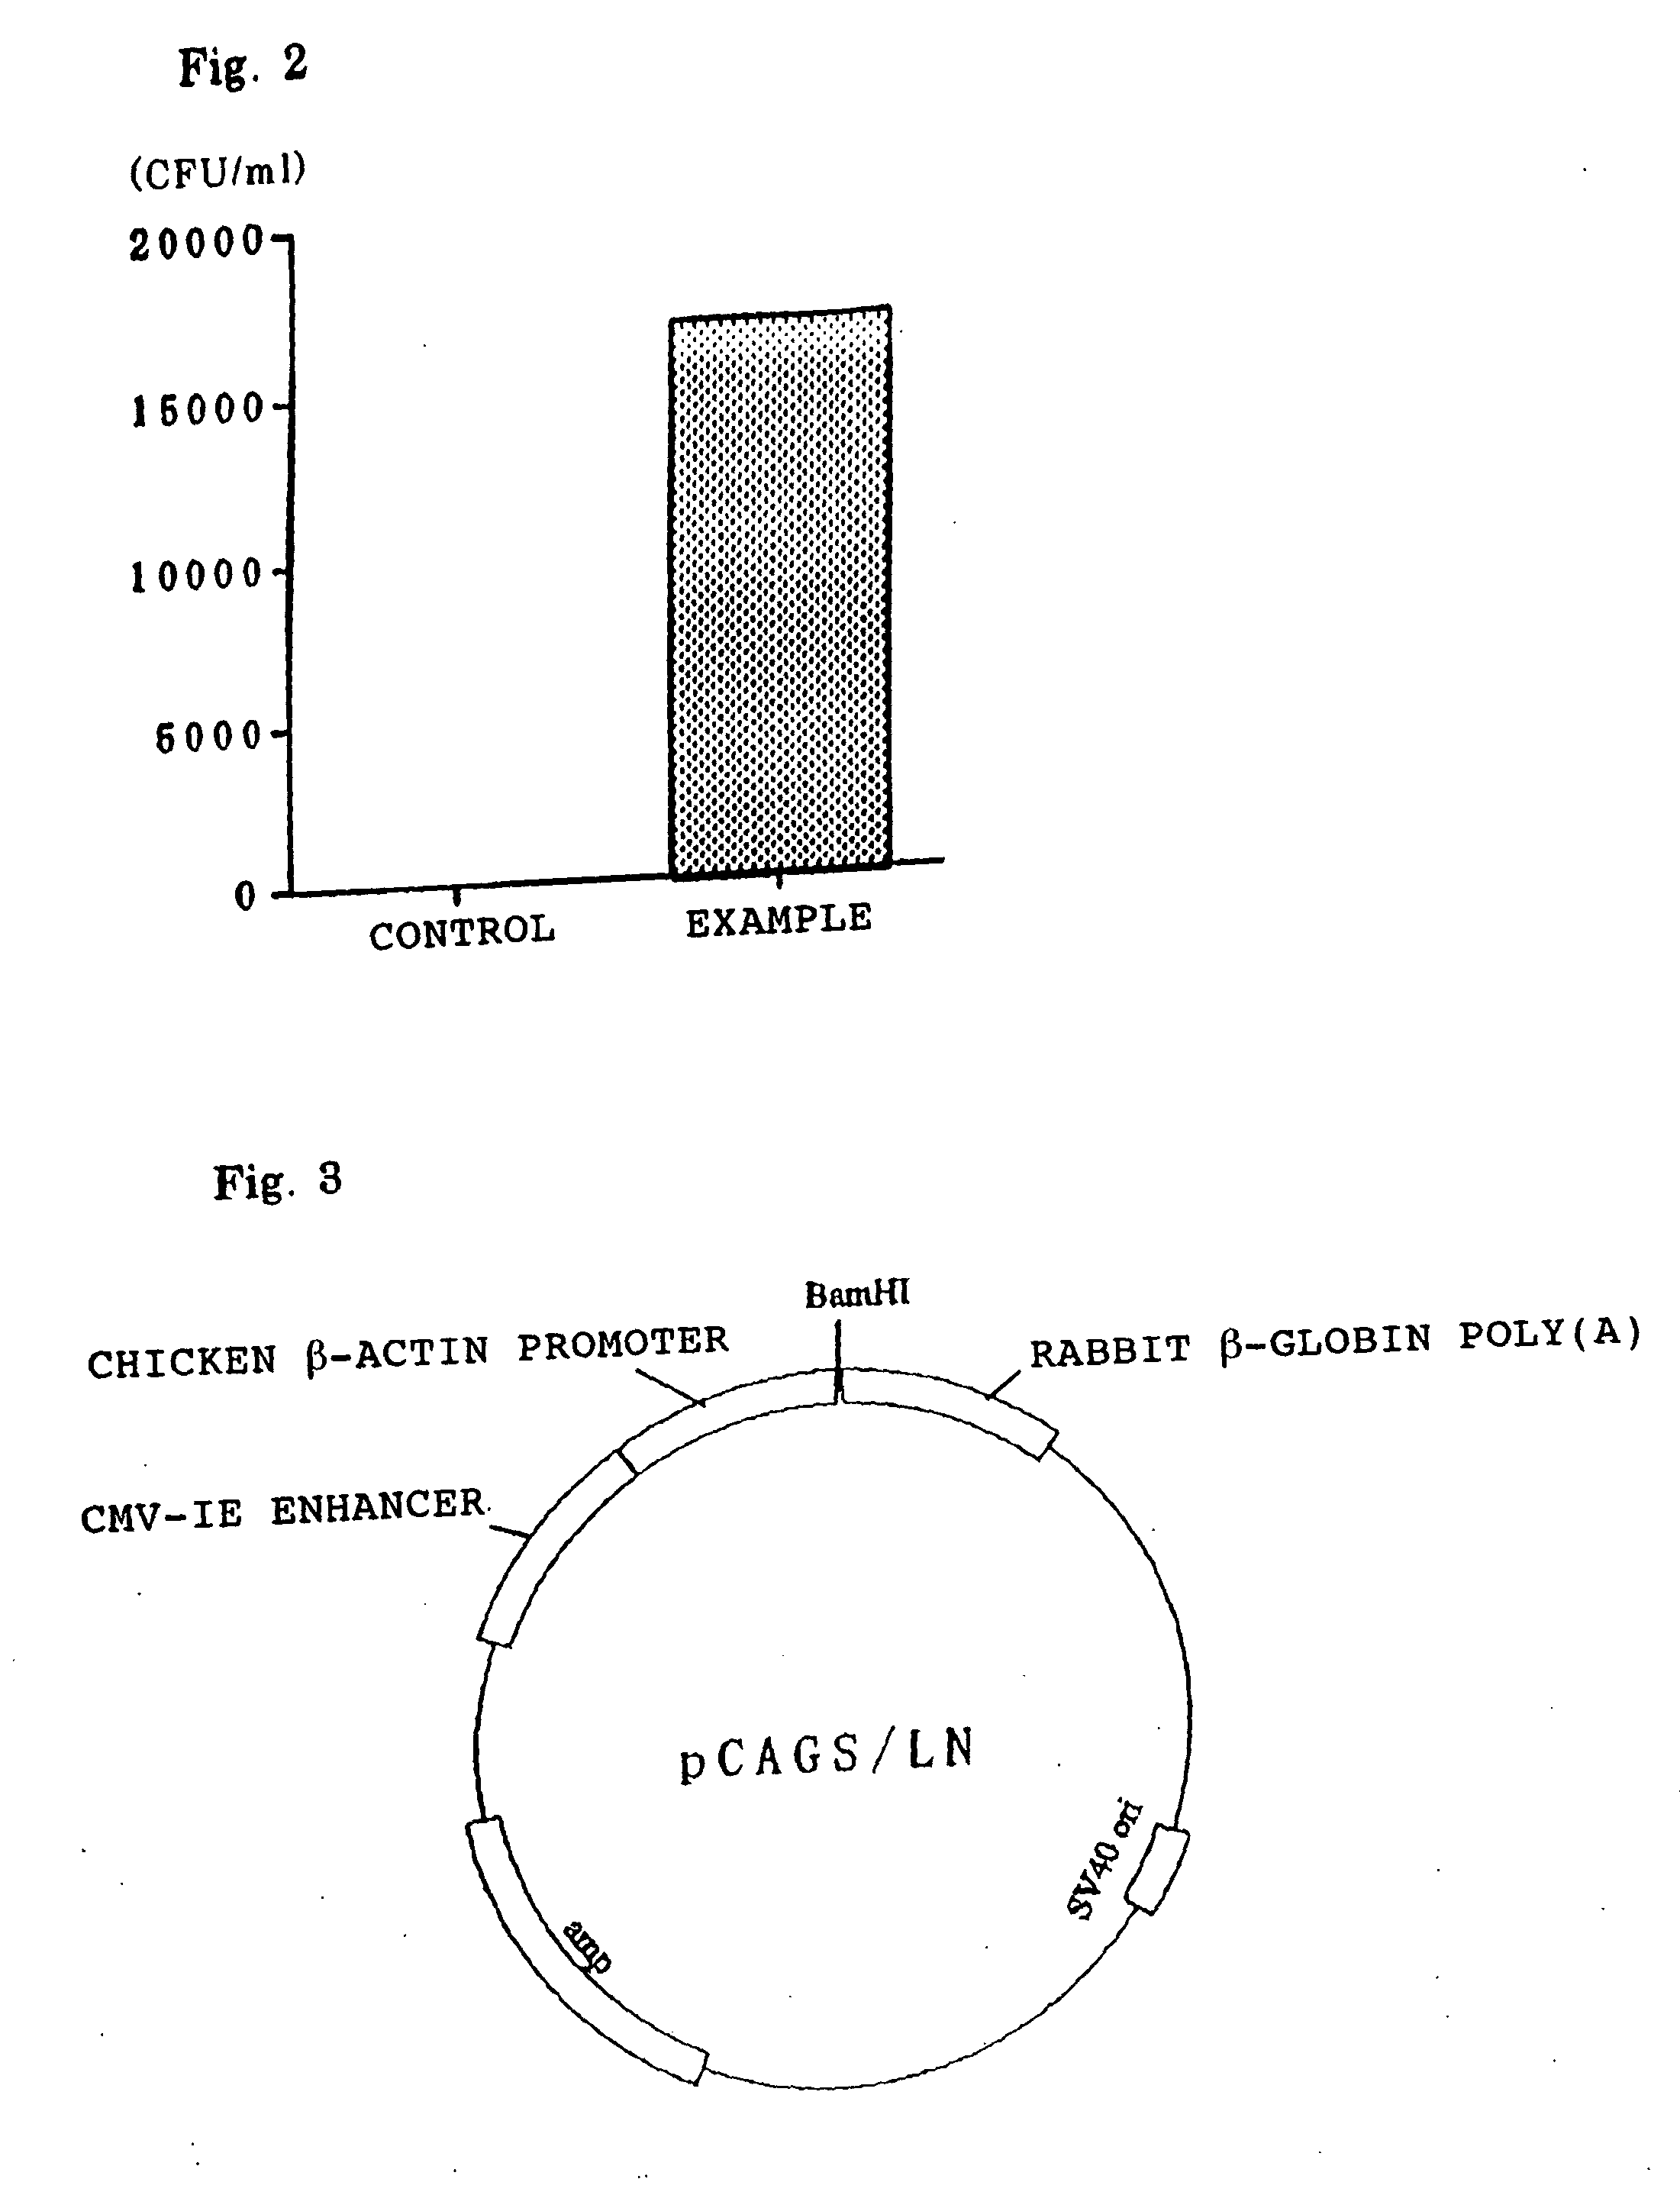 Cells to be used in producing virus vector, process for producing the same, and process for producing virus vector with the use of the cells